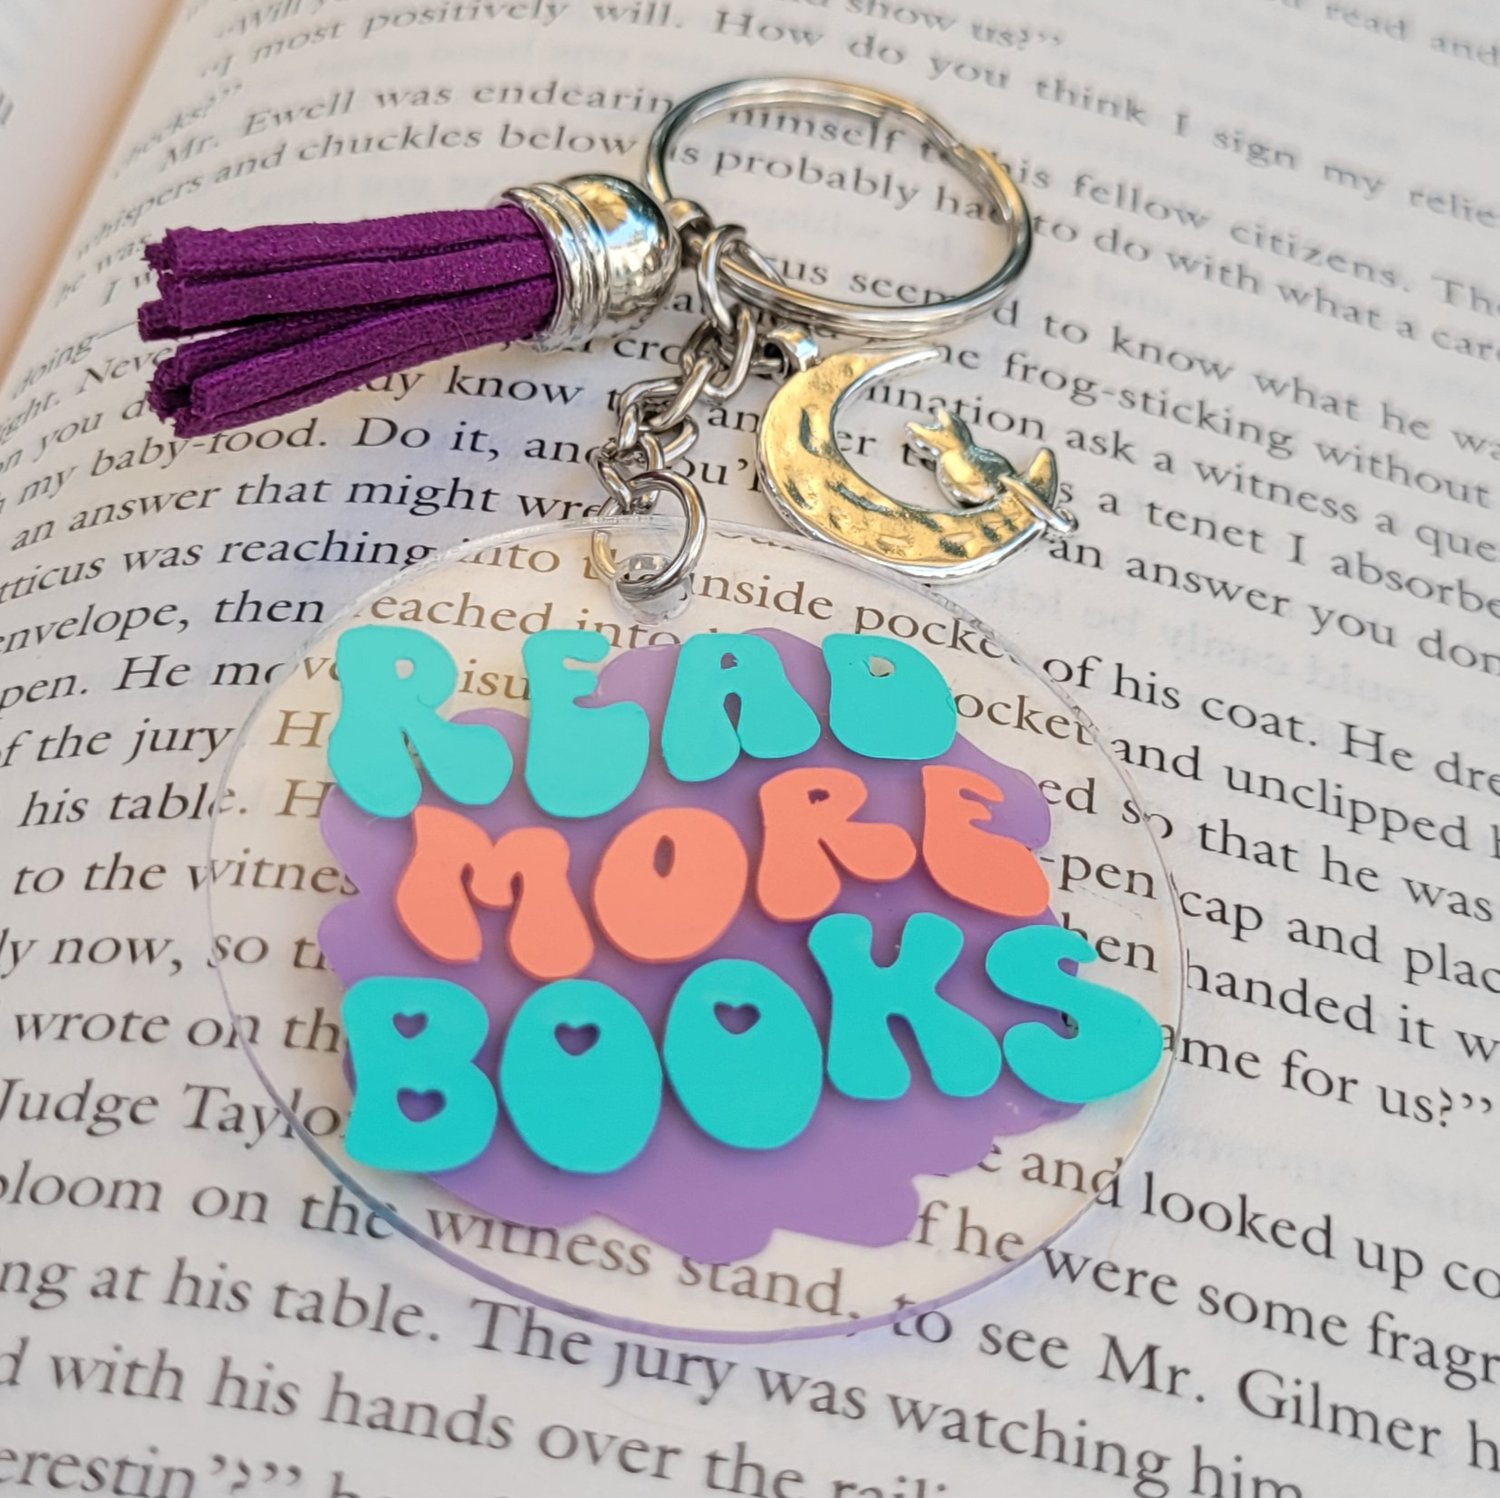 Image of Banned Books Keychain